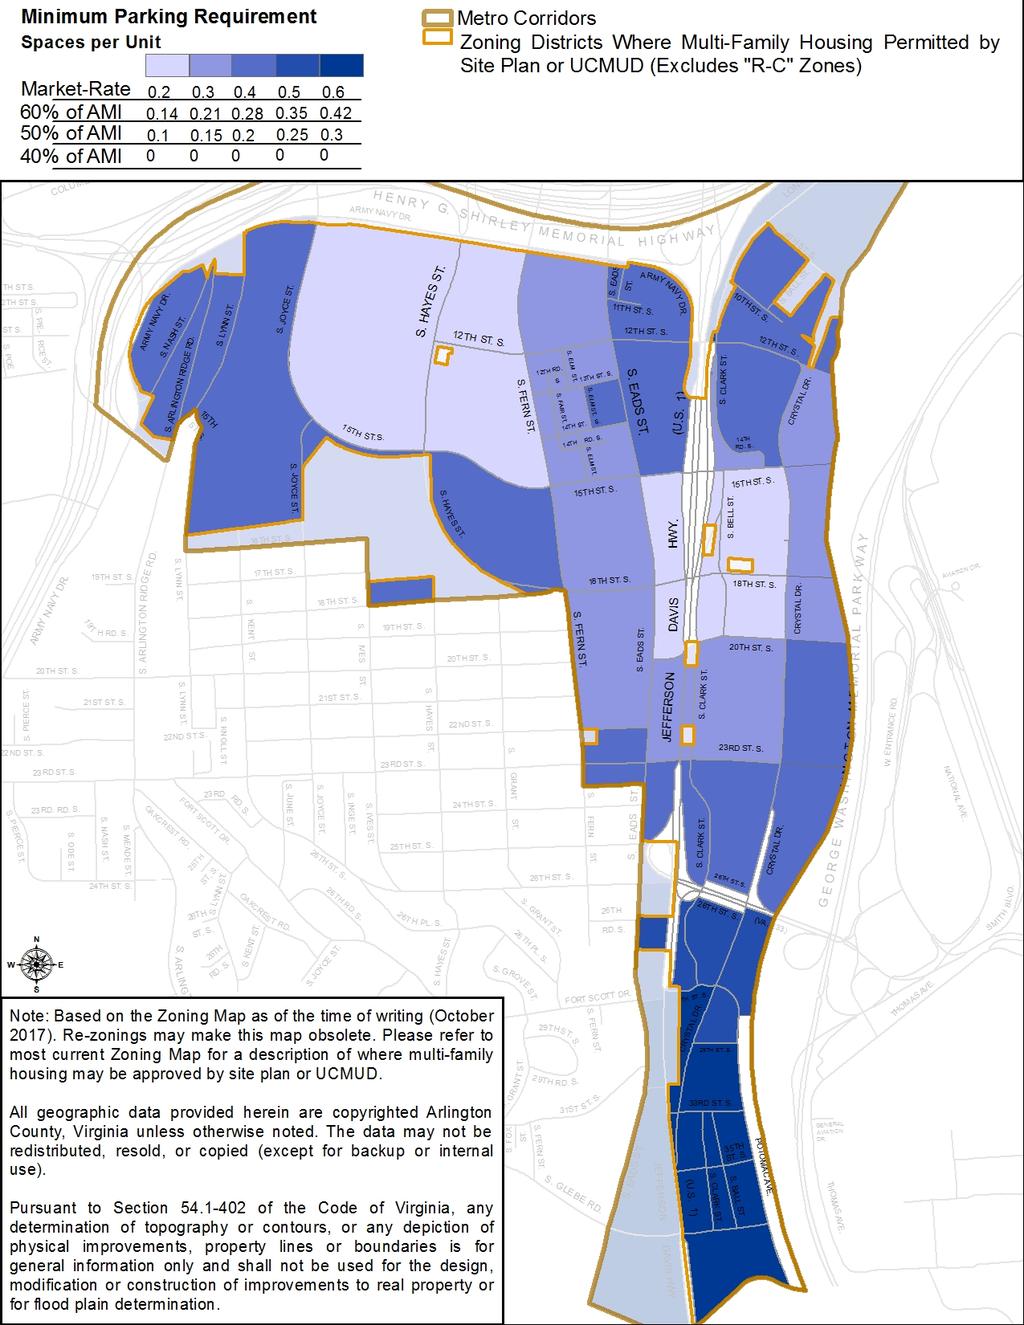 Figure 7: Proposed Parking Minimums in the Jefferson Davis Corridor Note Areas not zoned to allow